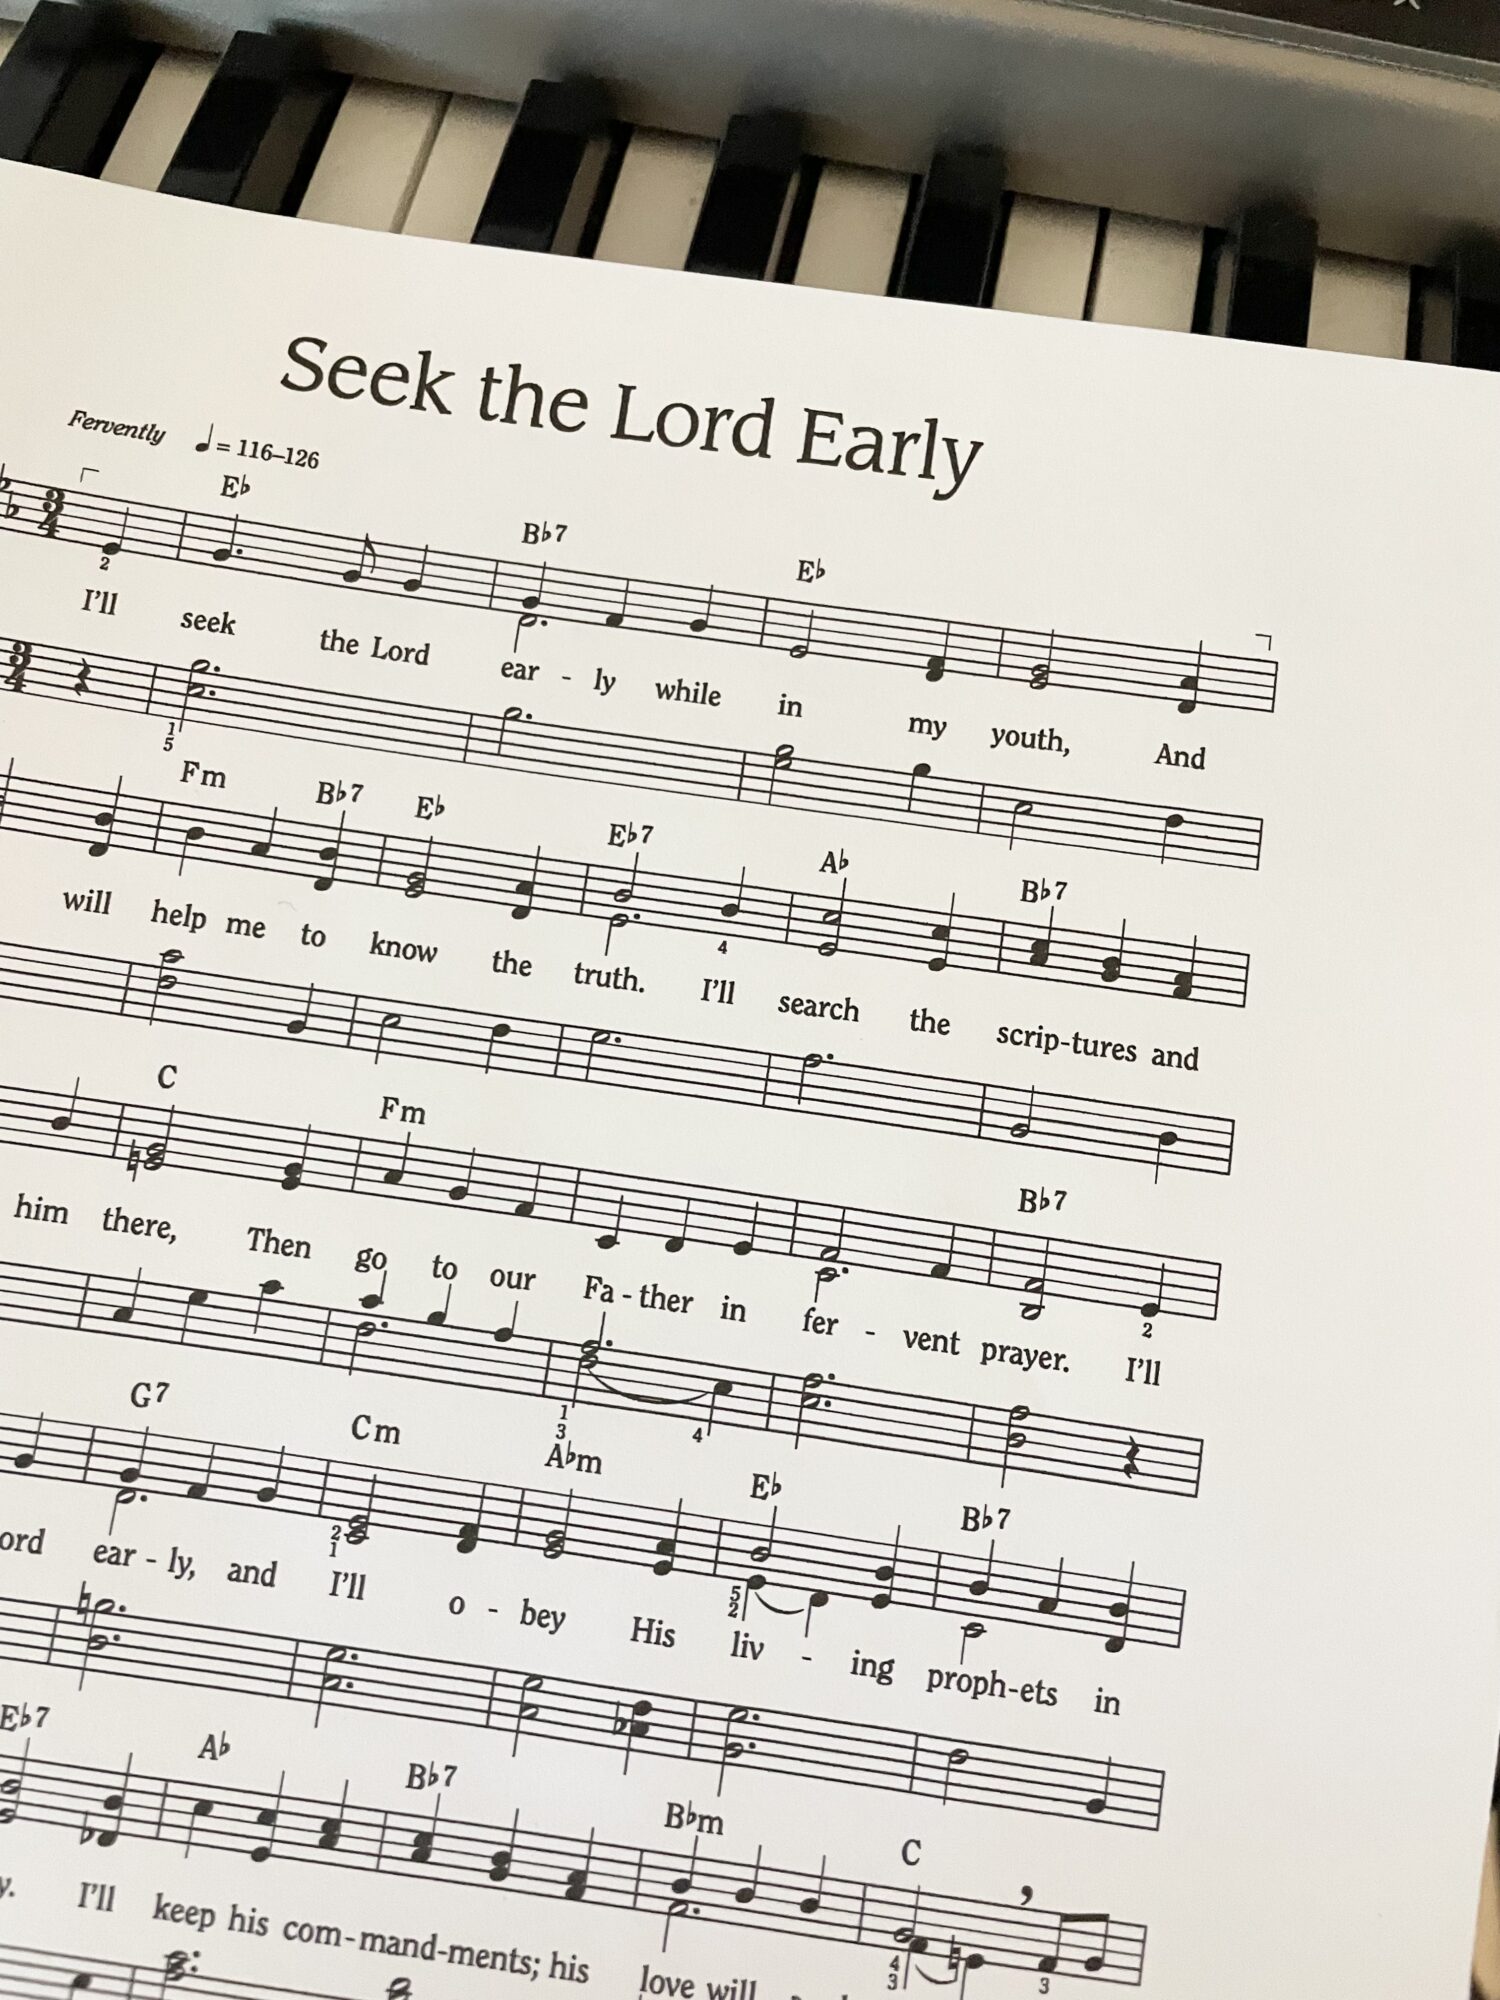 Seek the Lord Early Musical Number Easy ideas for Music Leaders IMG 6550